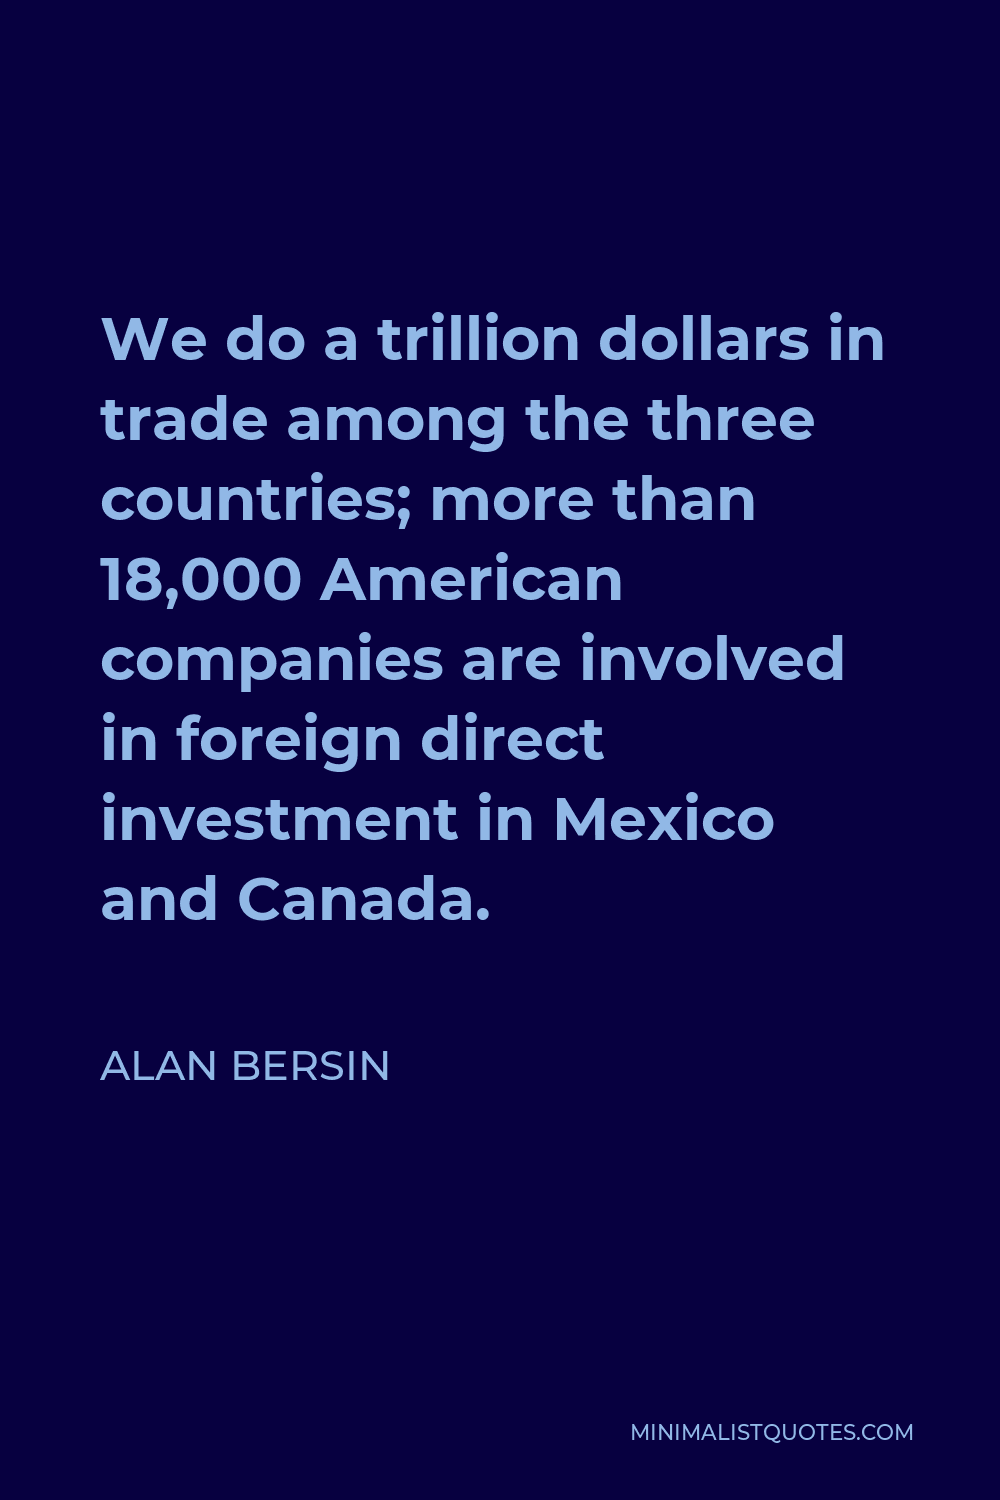 Alan Bersin Quote - We do a trillion dollars in trade among the three countries; more than 18,000 American companies are involved in foreign direct investment in Mexico and Canada.